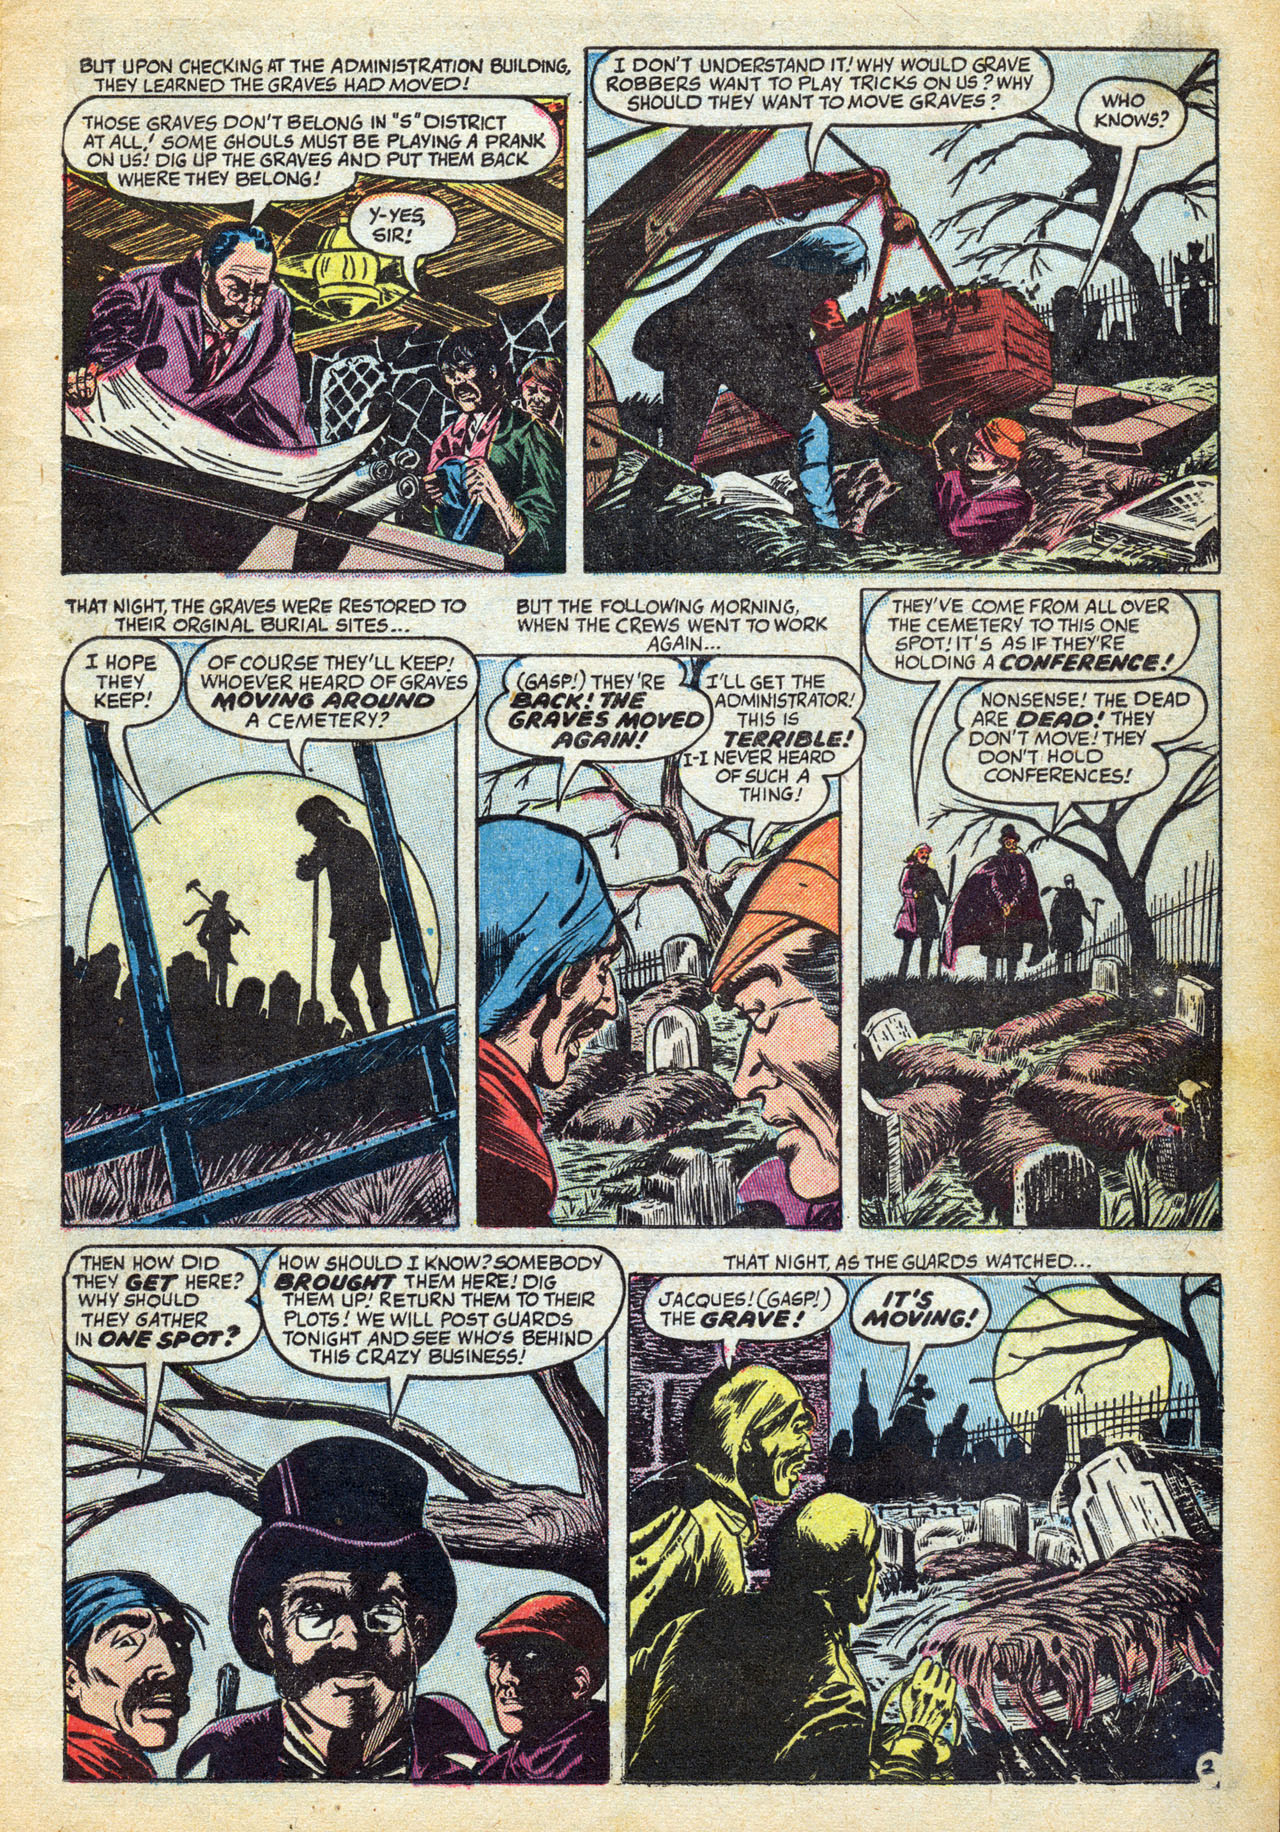 Marvel Tales (1949) 126 Page 10